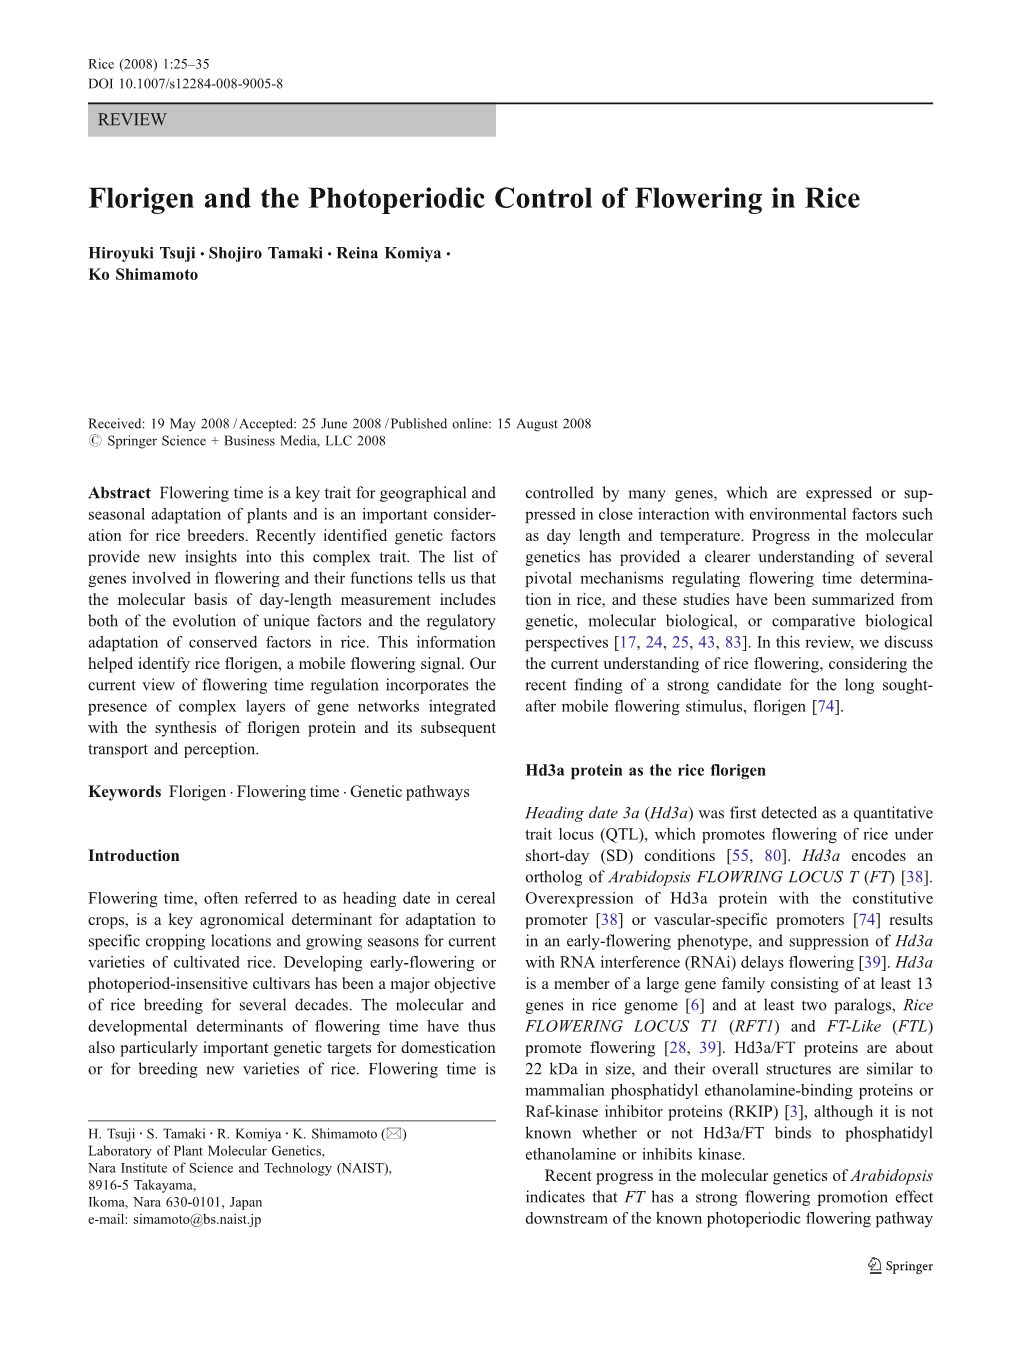 Florigen and the Photoperiodic Control of Flowering in Rice